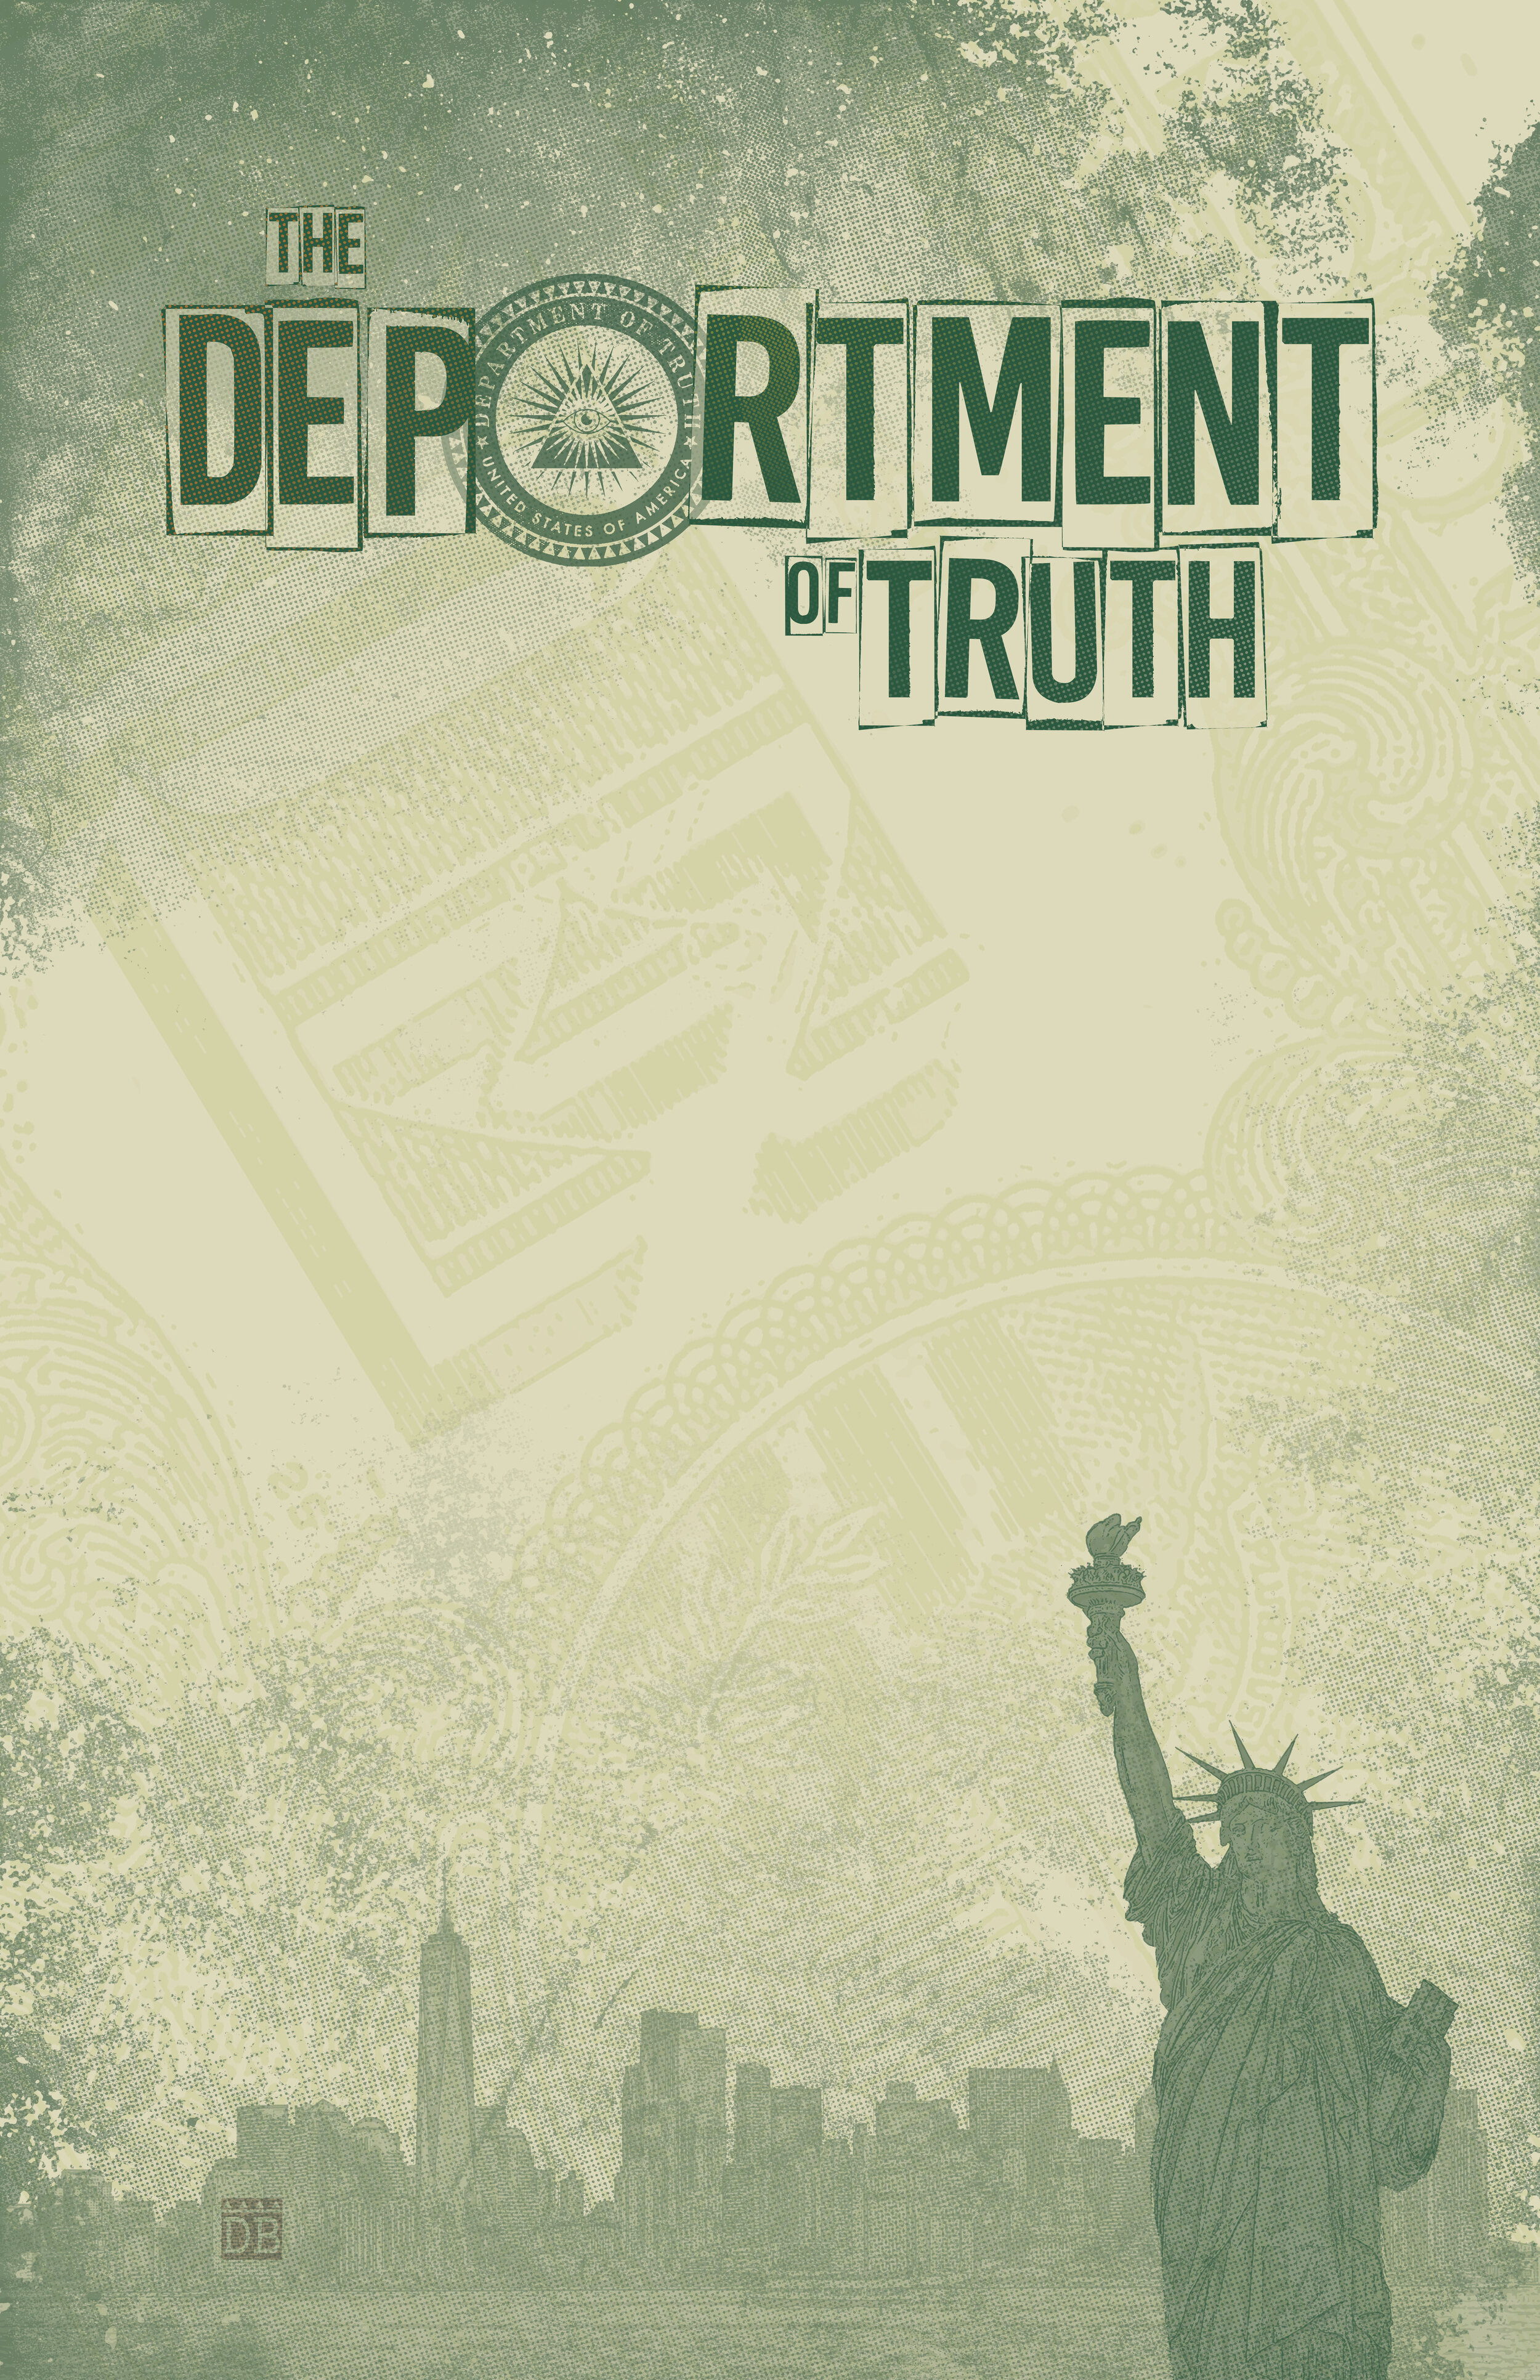 Department of Truth Issue 10 OASAS Comics / ComicBlend Shared Exclusive Set